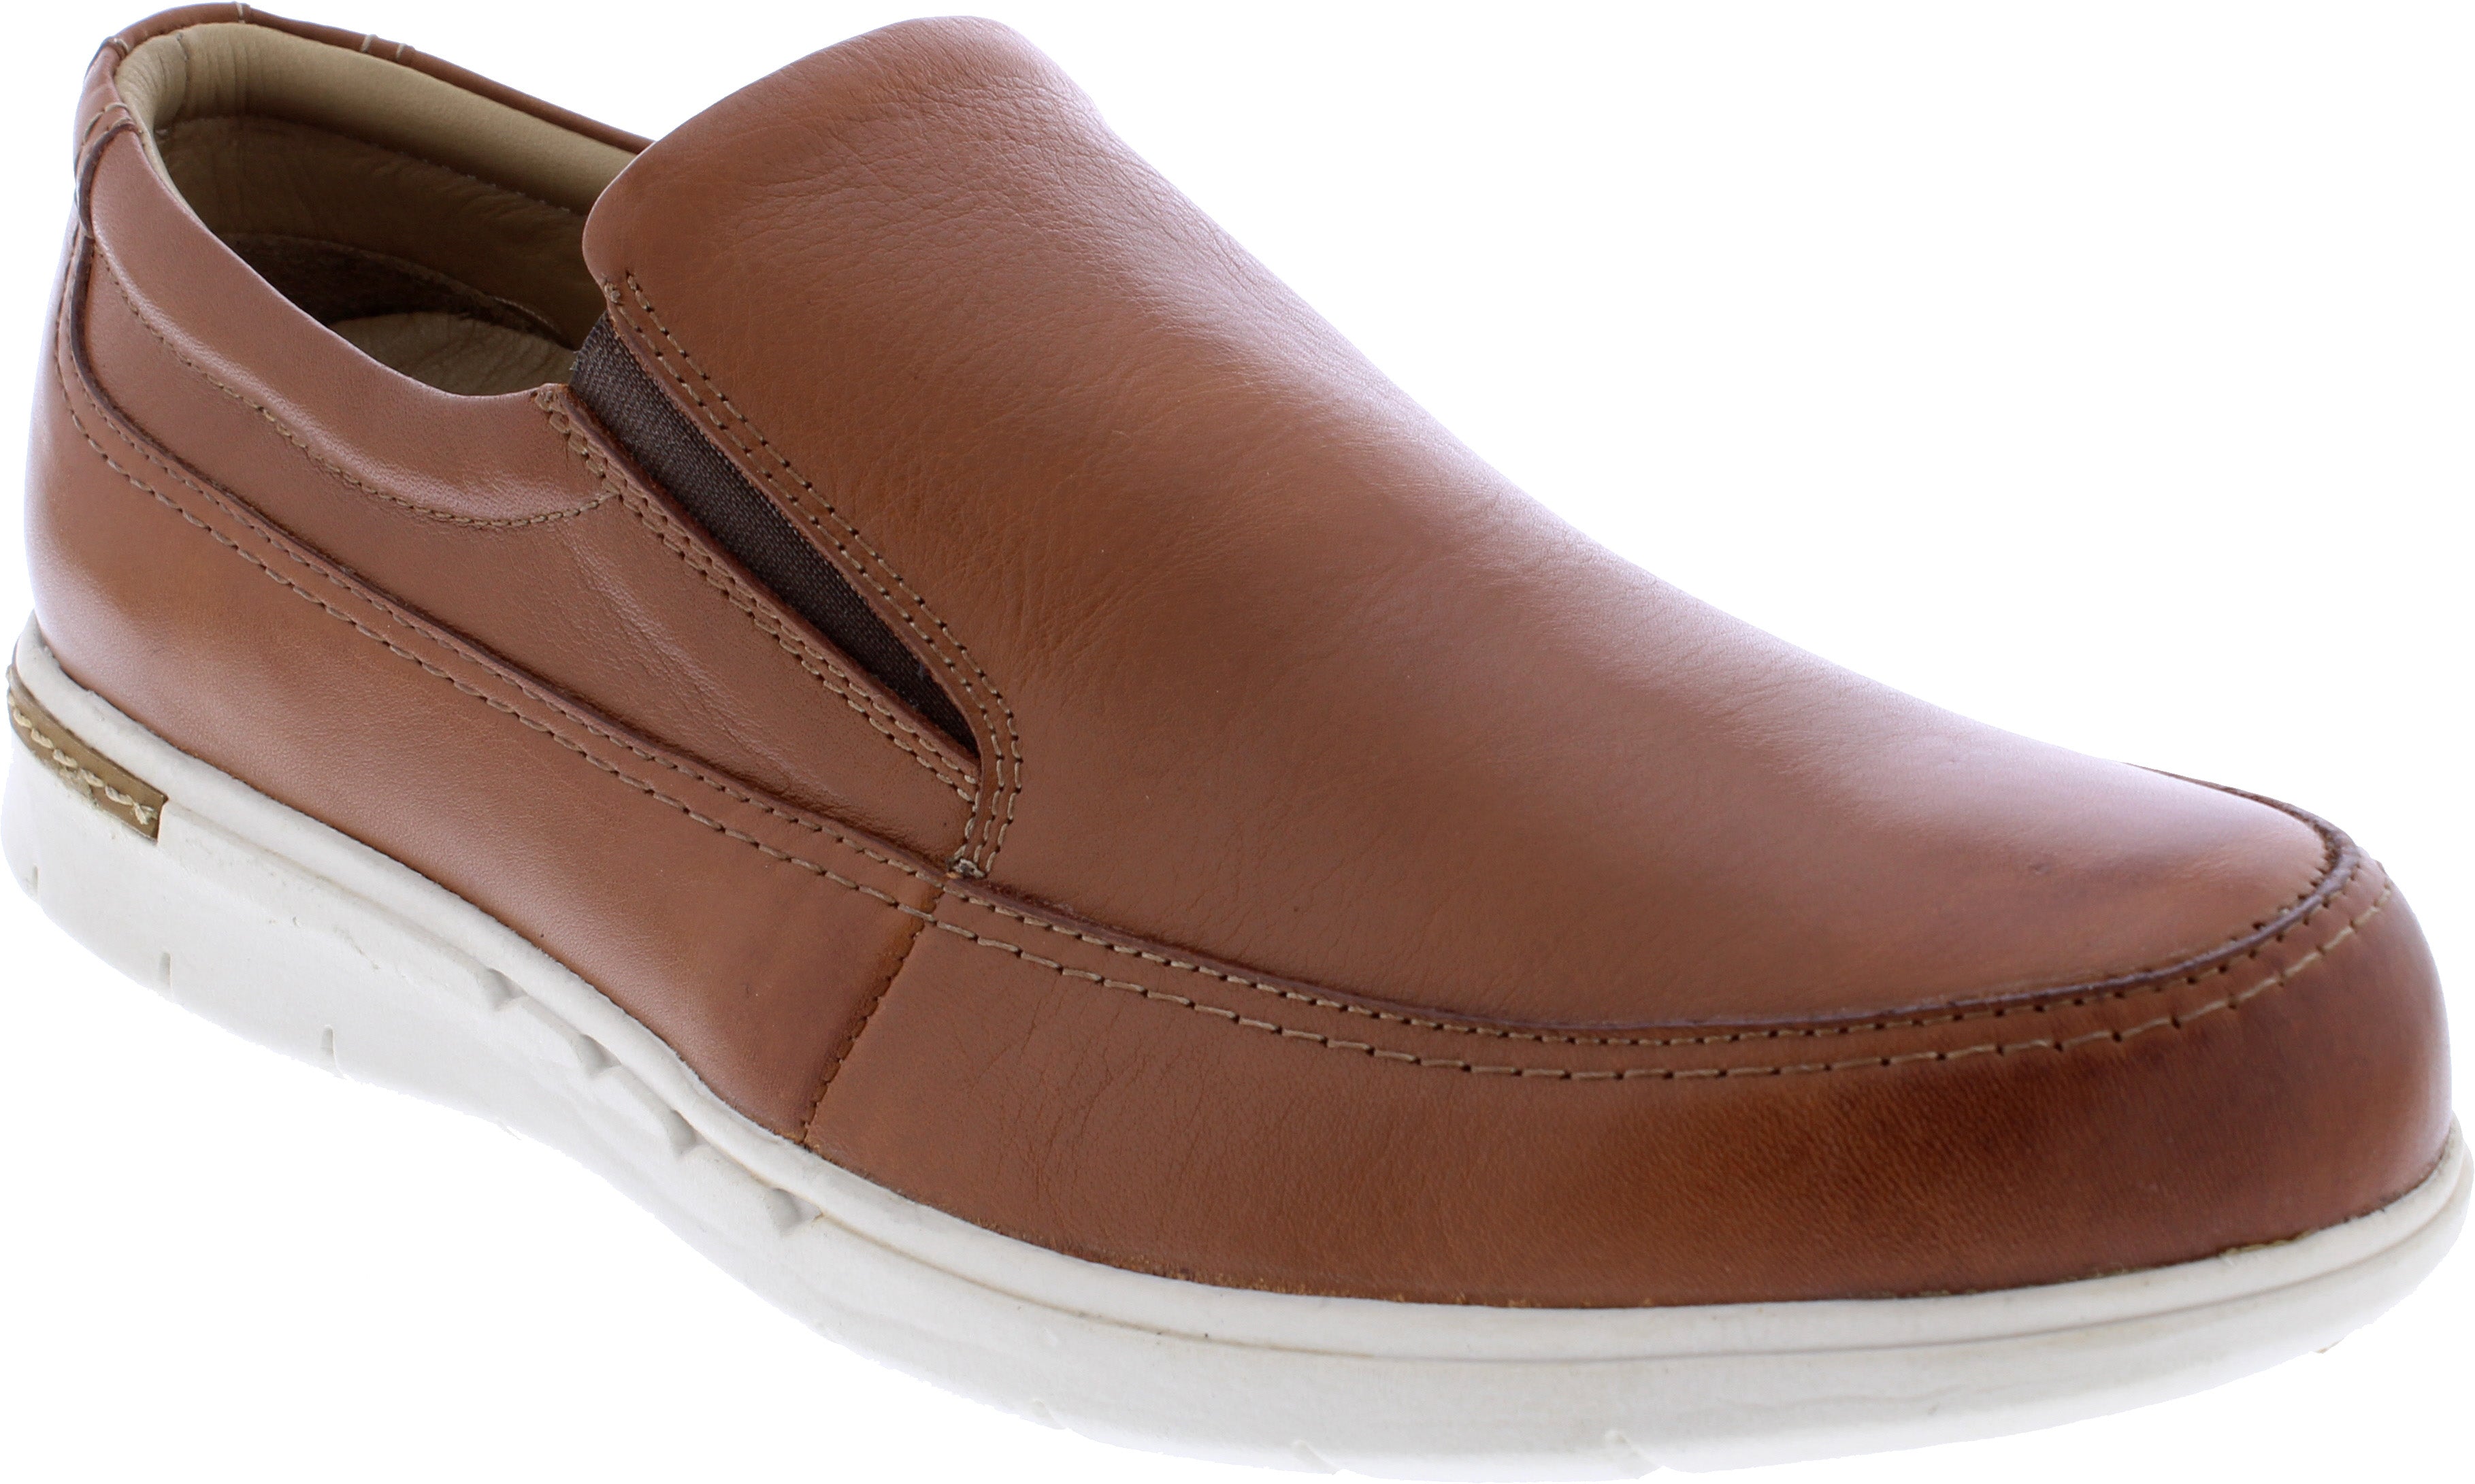 Country Jack 9688 Henry Mens Tan Leather Slip On Shoes